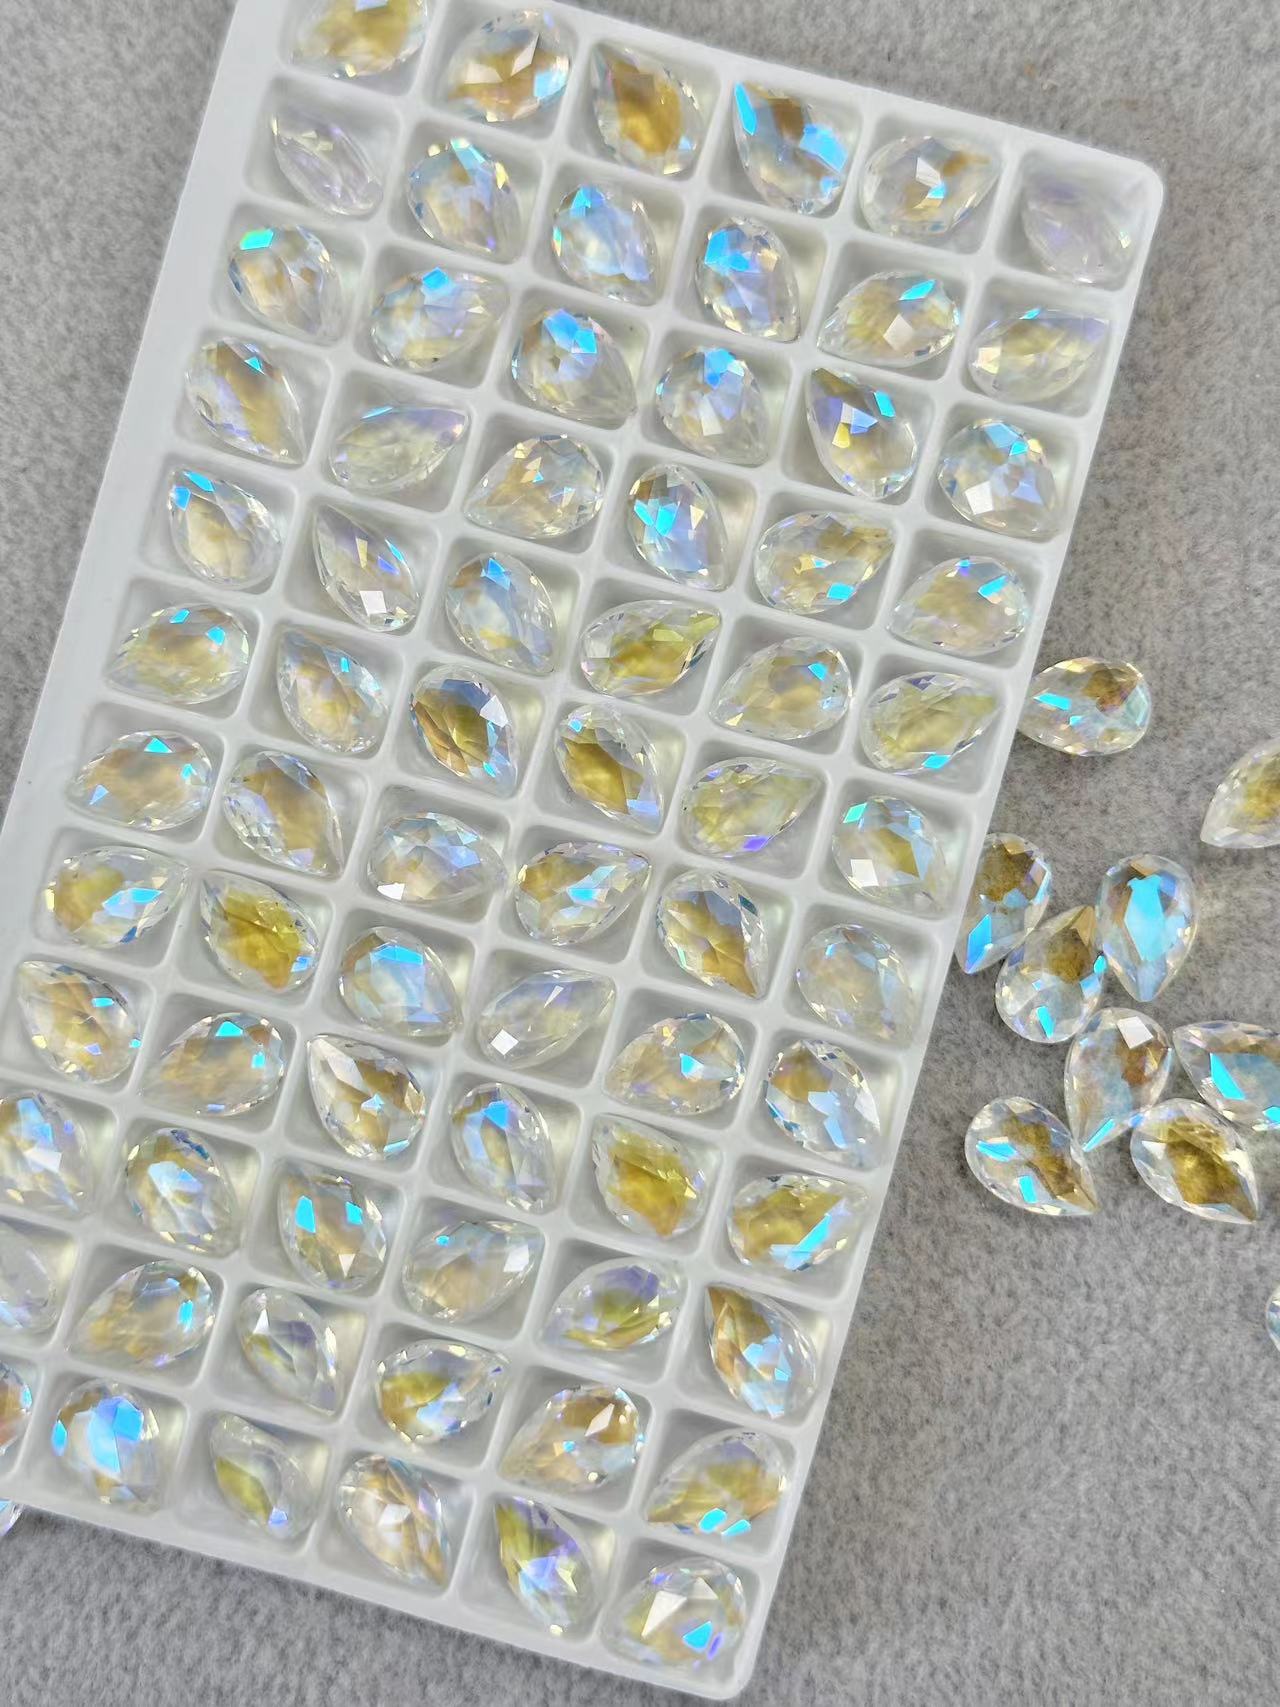 Bulb AB Color 8 * 12mm Pear-Shaped Water Drop Nail Beauty Rhinestone Ornaments Accessories Factory Wholesale 1 Dozen 10